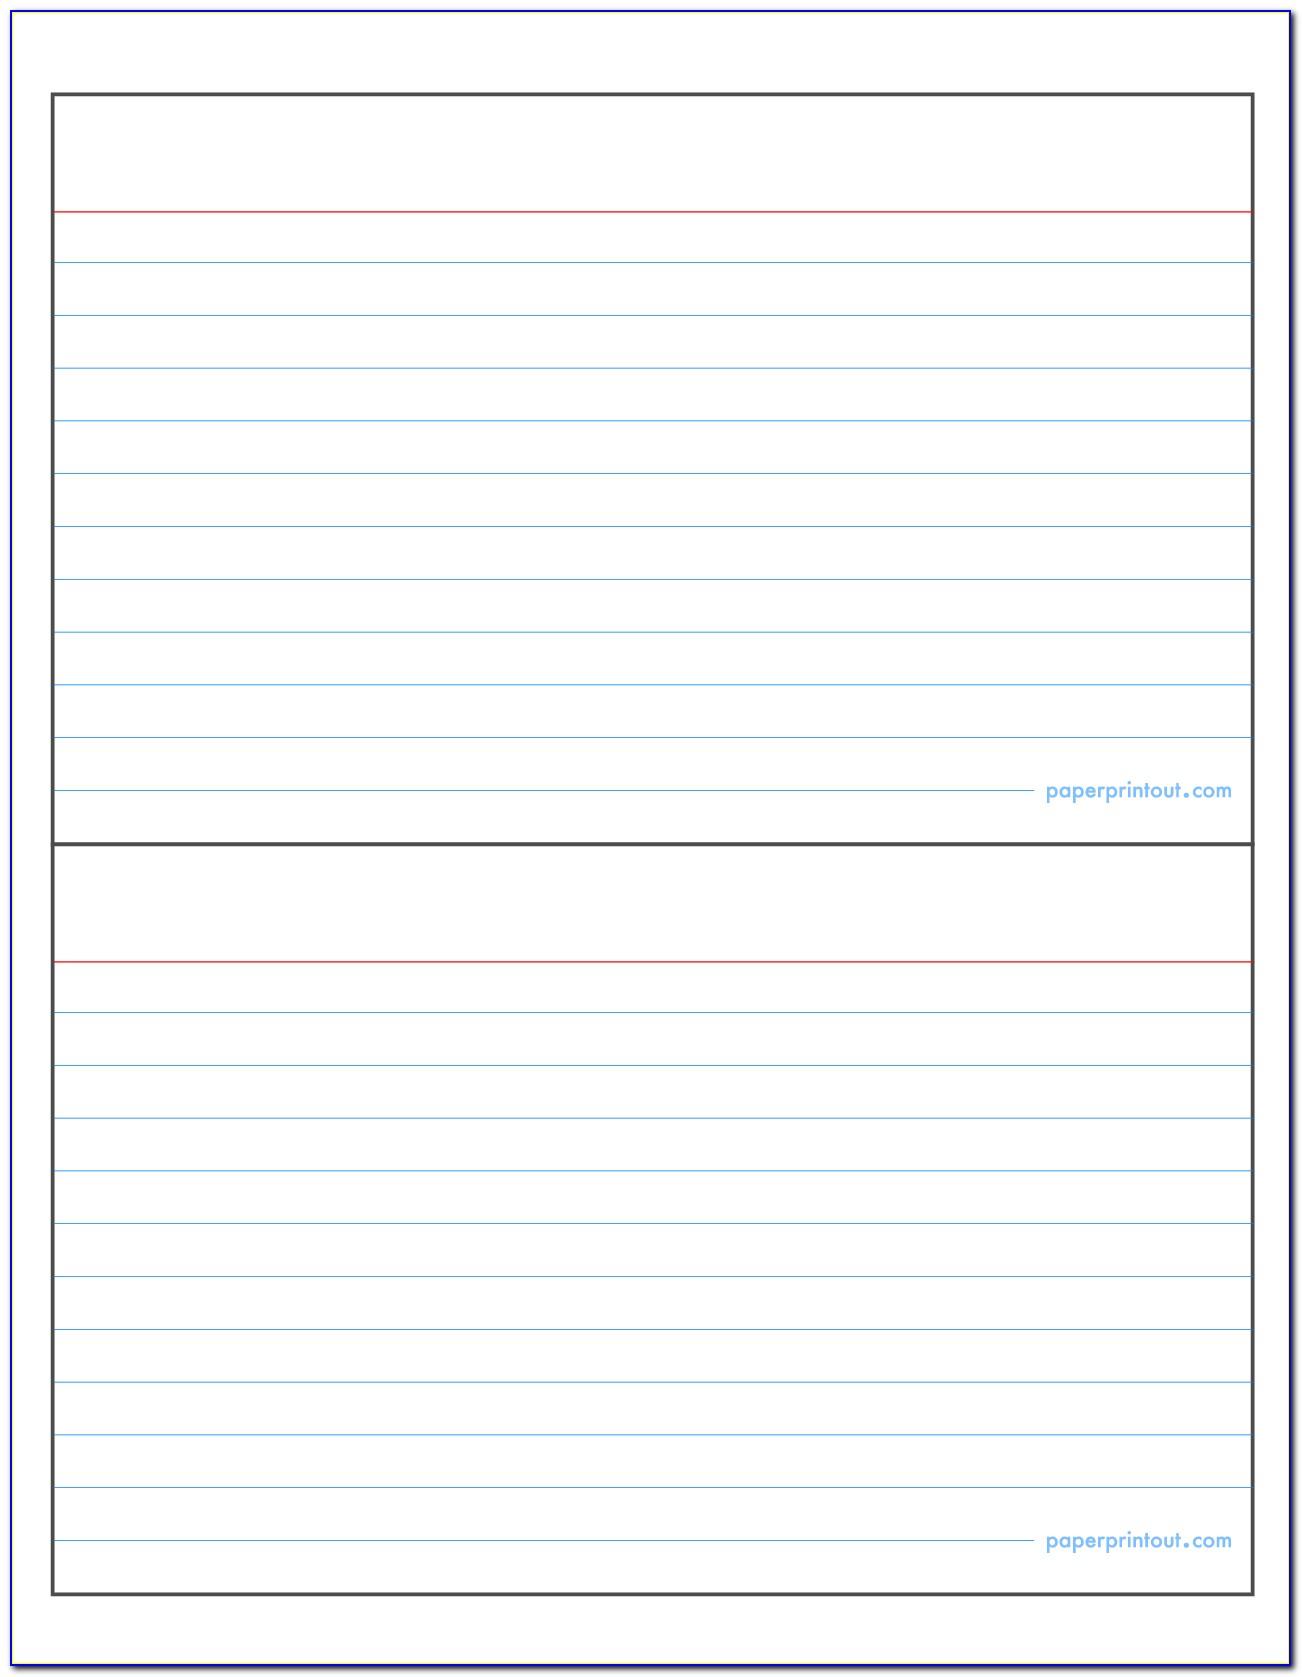 Avery Index Card Template 3x5